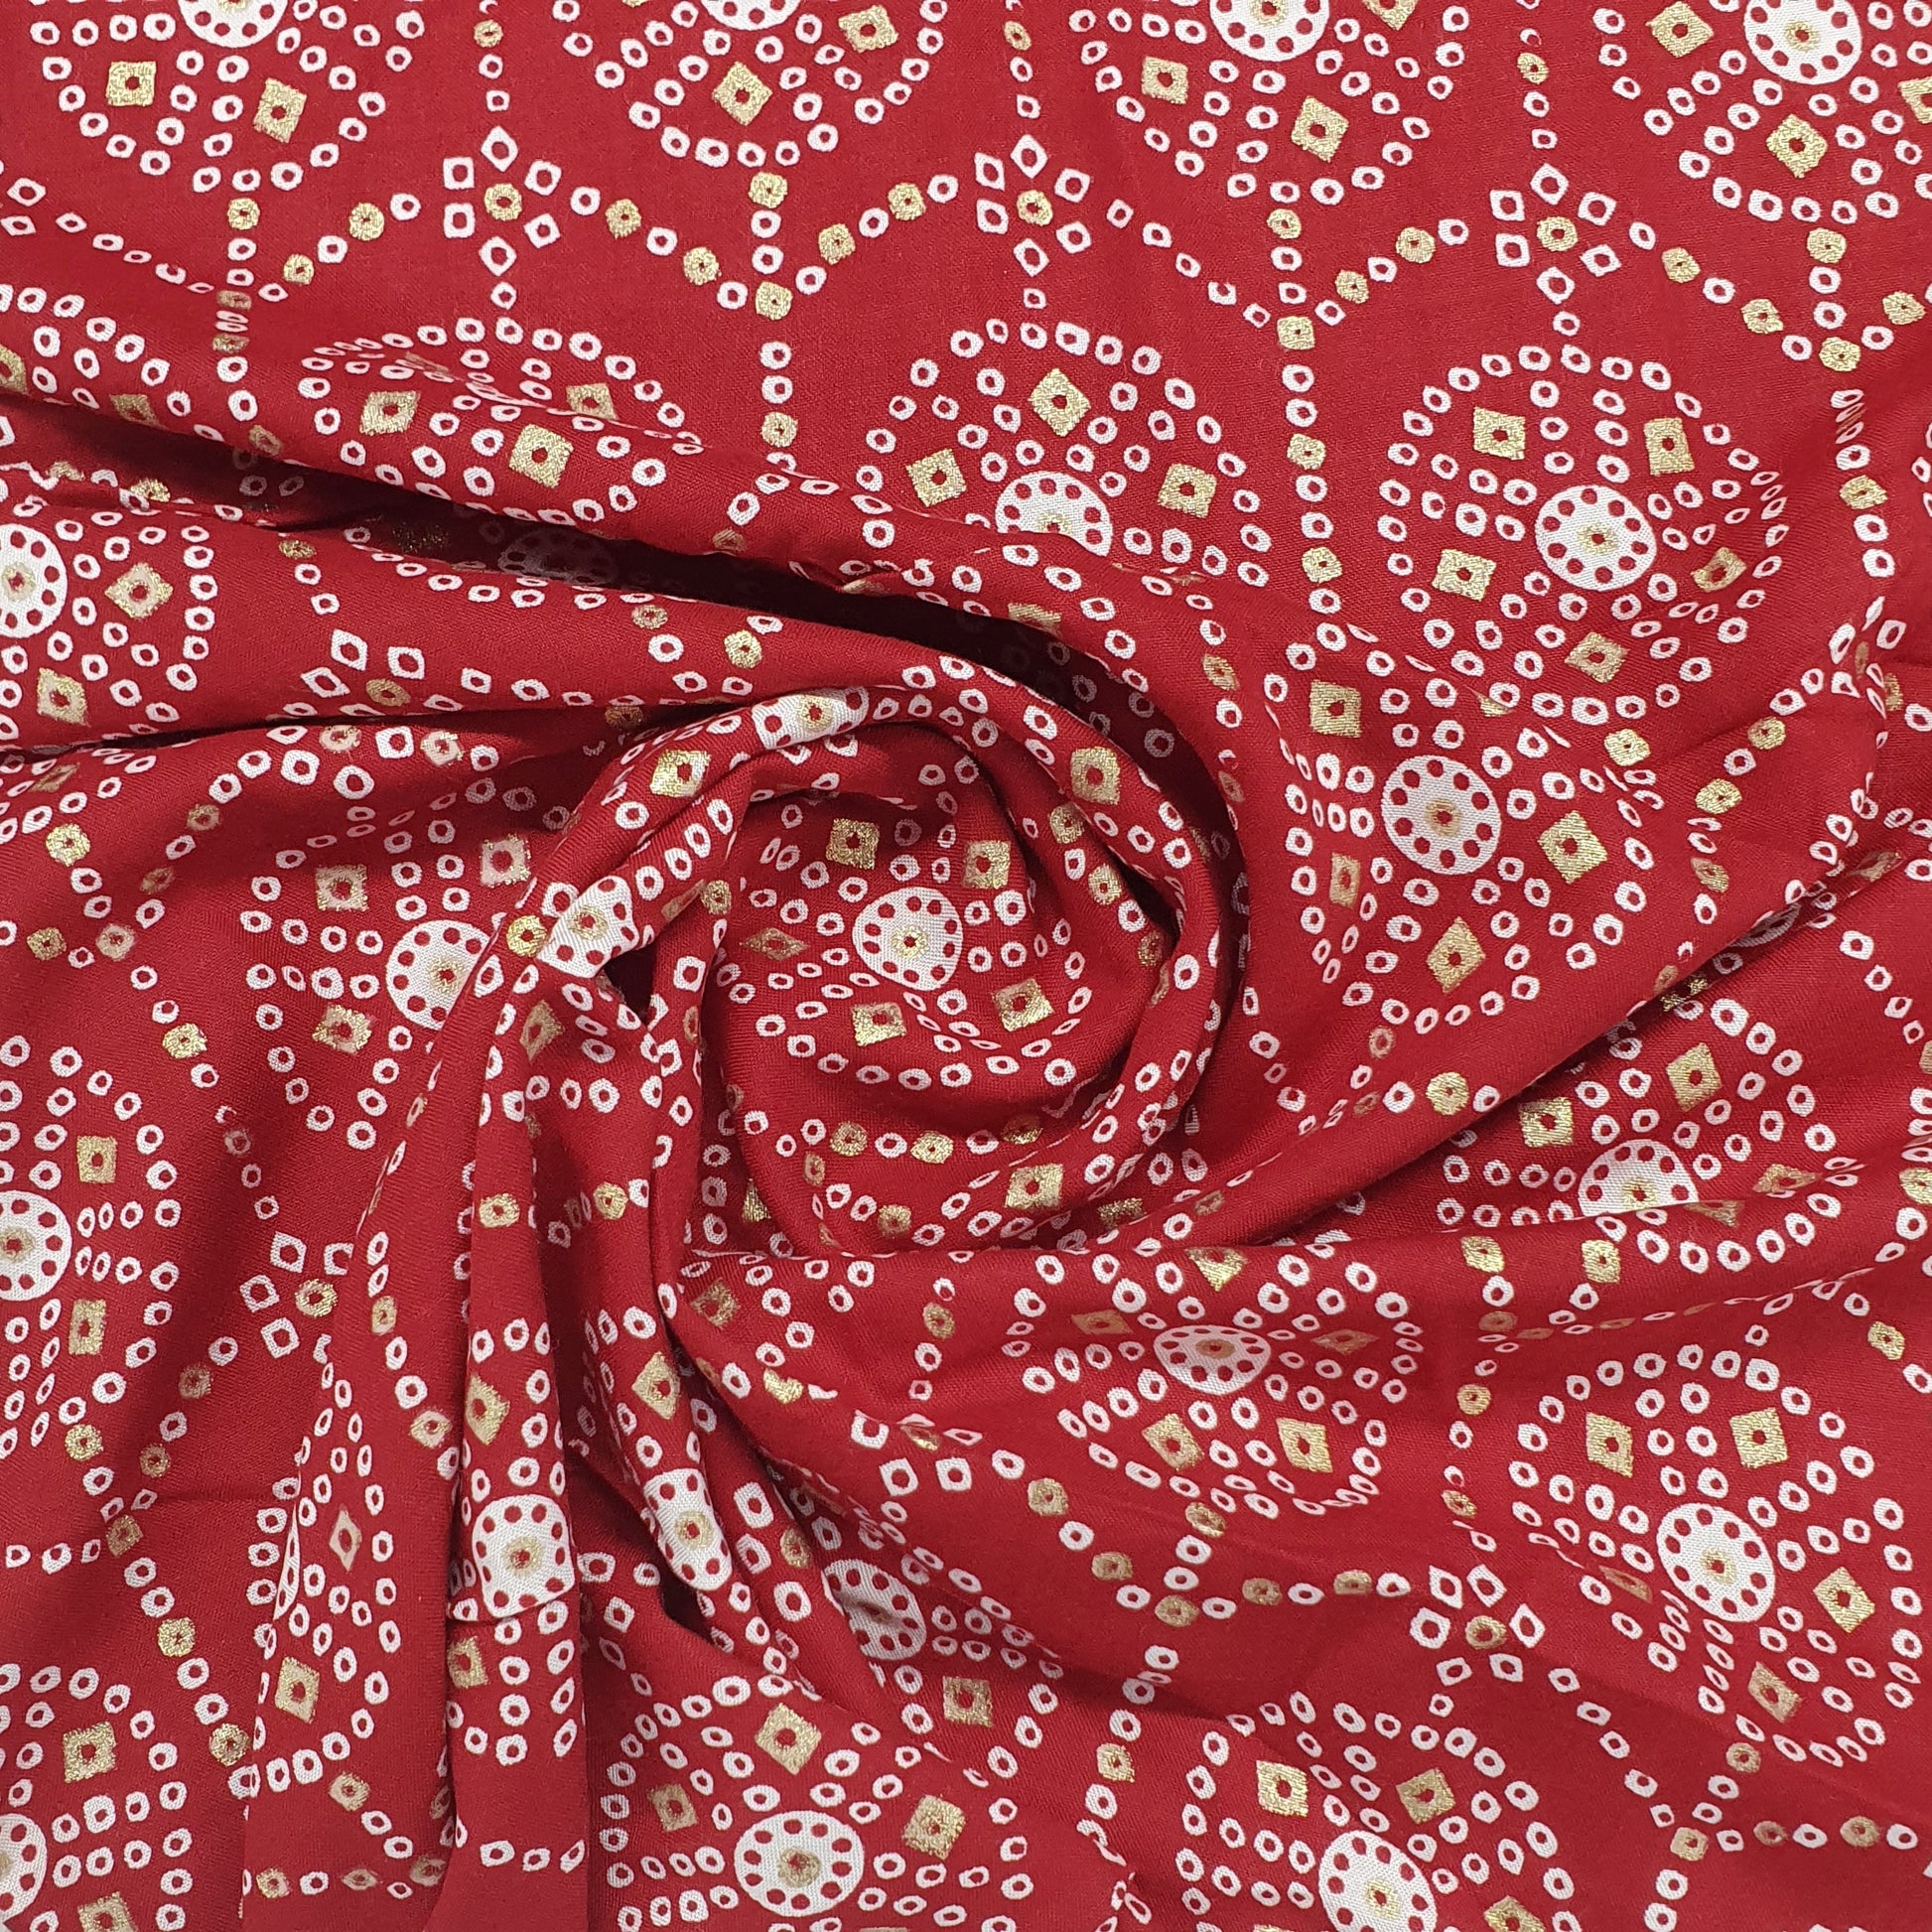 Red Bandhani With Foil Print Rayon Fabric Plain Weave 46 Inches 